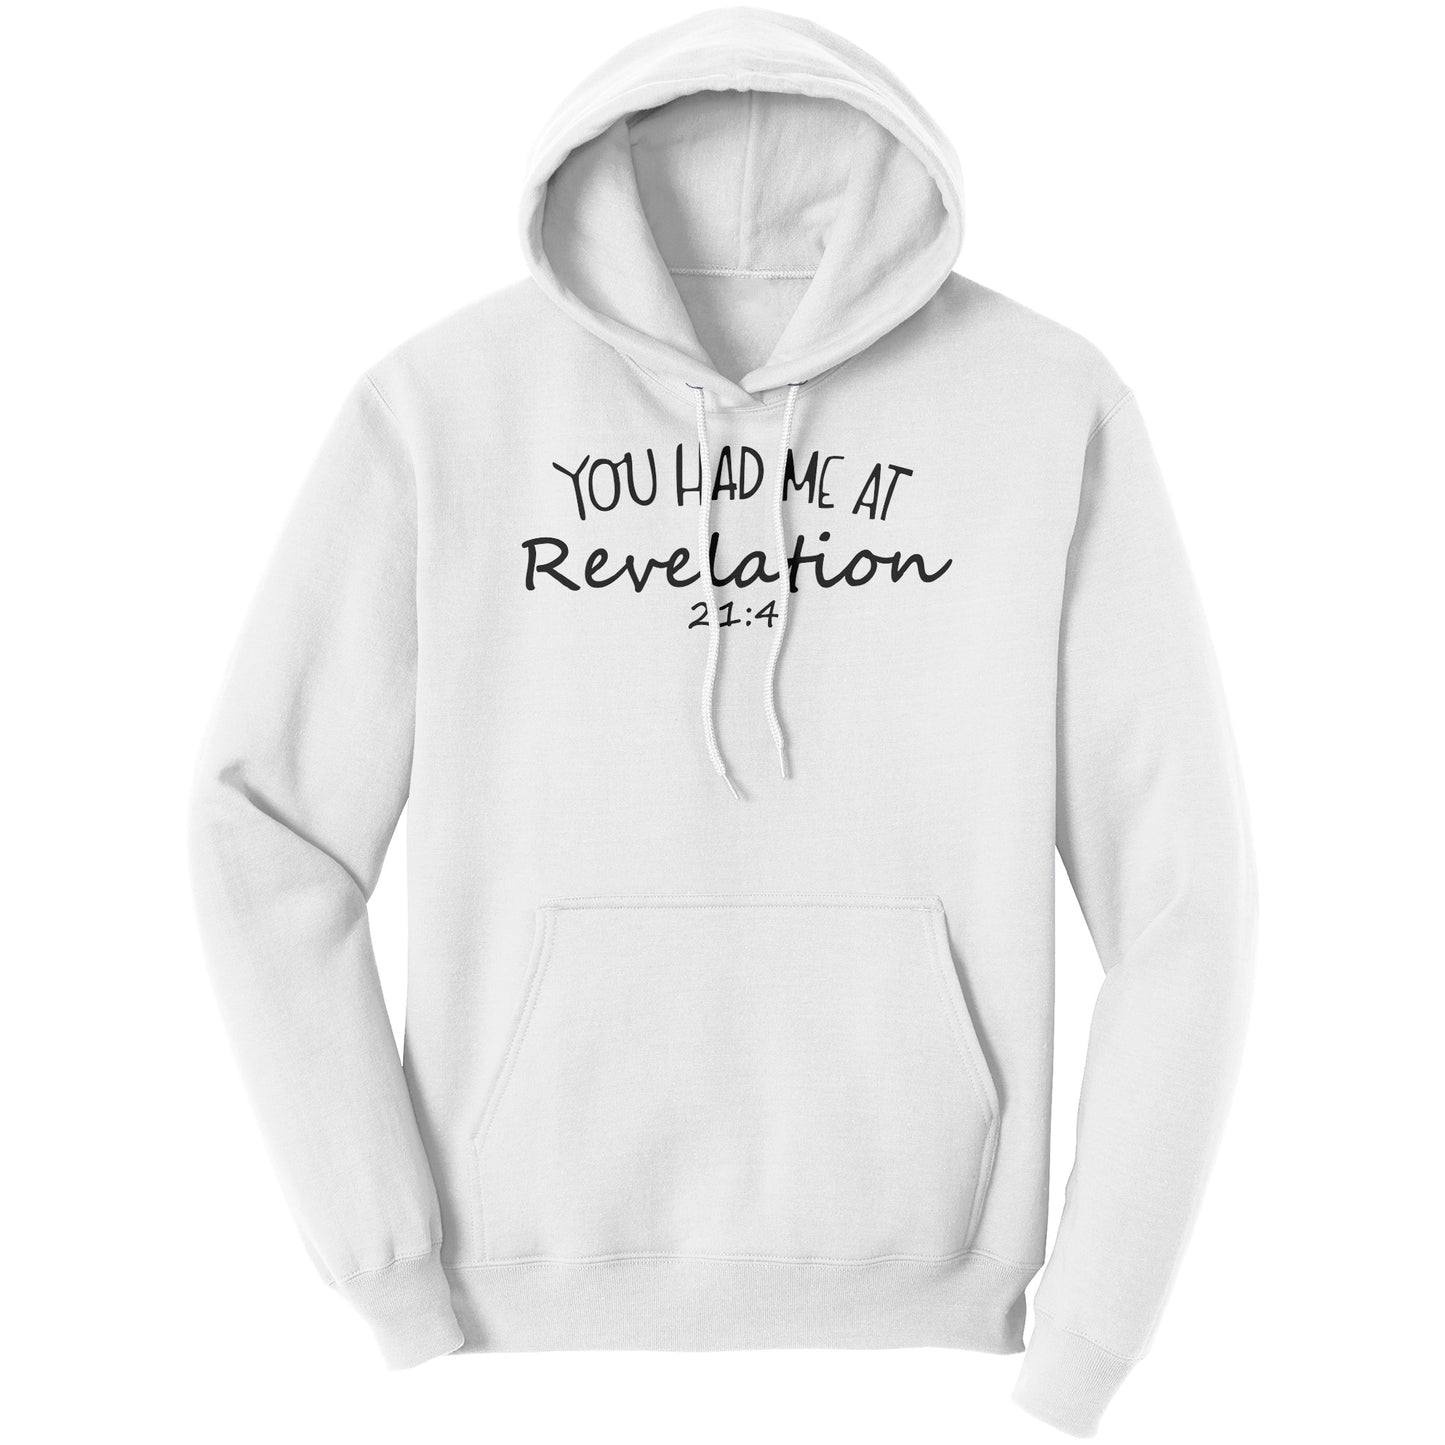 You Had Me At Revelation 21:4 Hoodie Part 1